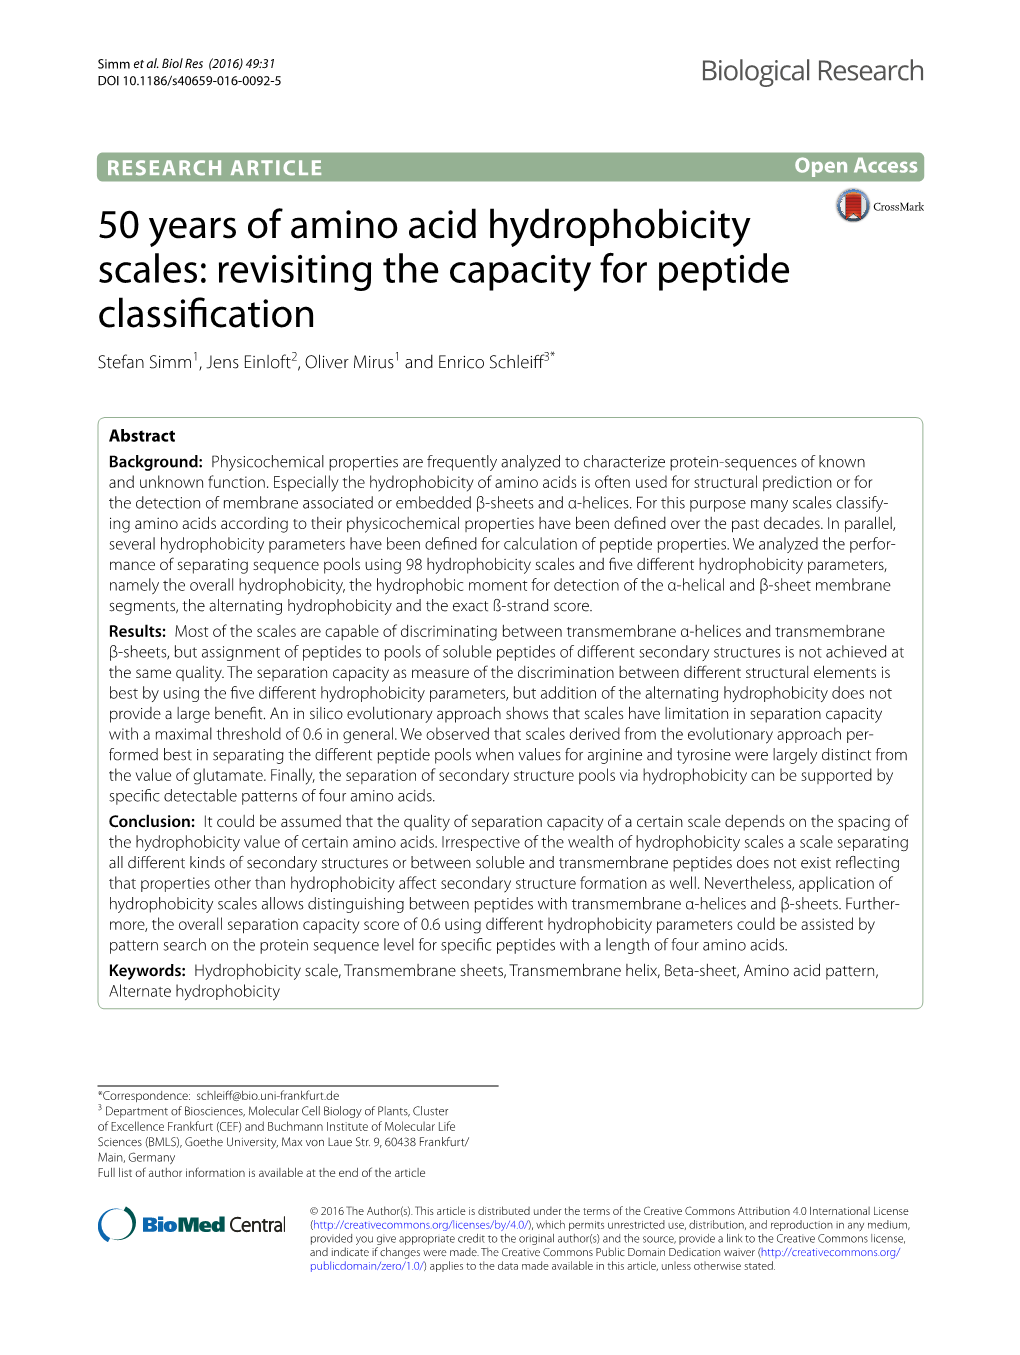 50 Years of Amino Acid Hydrophobicity Scales: Revisiting the Capacity for Peptide Classification Stefan Simm1, Jens Einloft2, Oliver Mirus1 and Enrico Schleiff3*